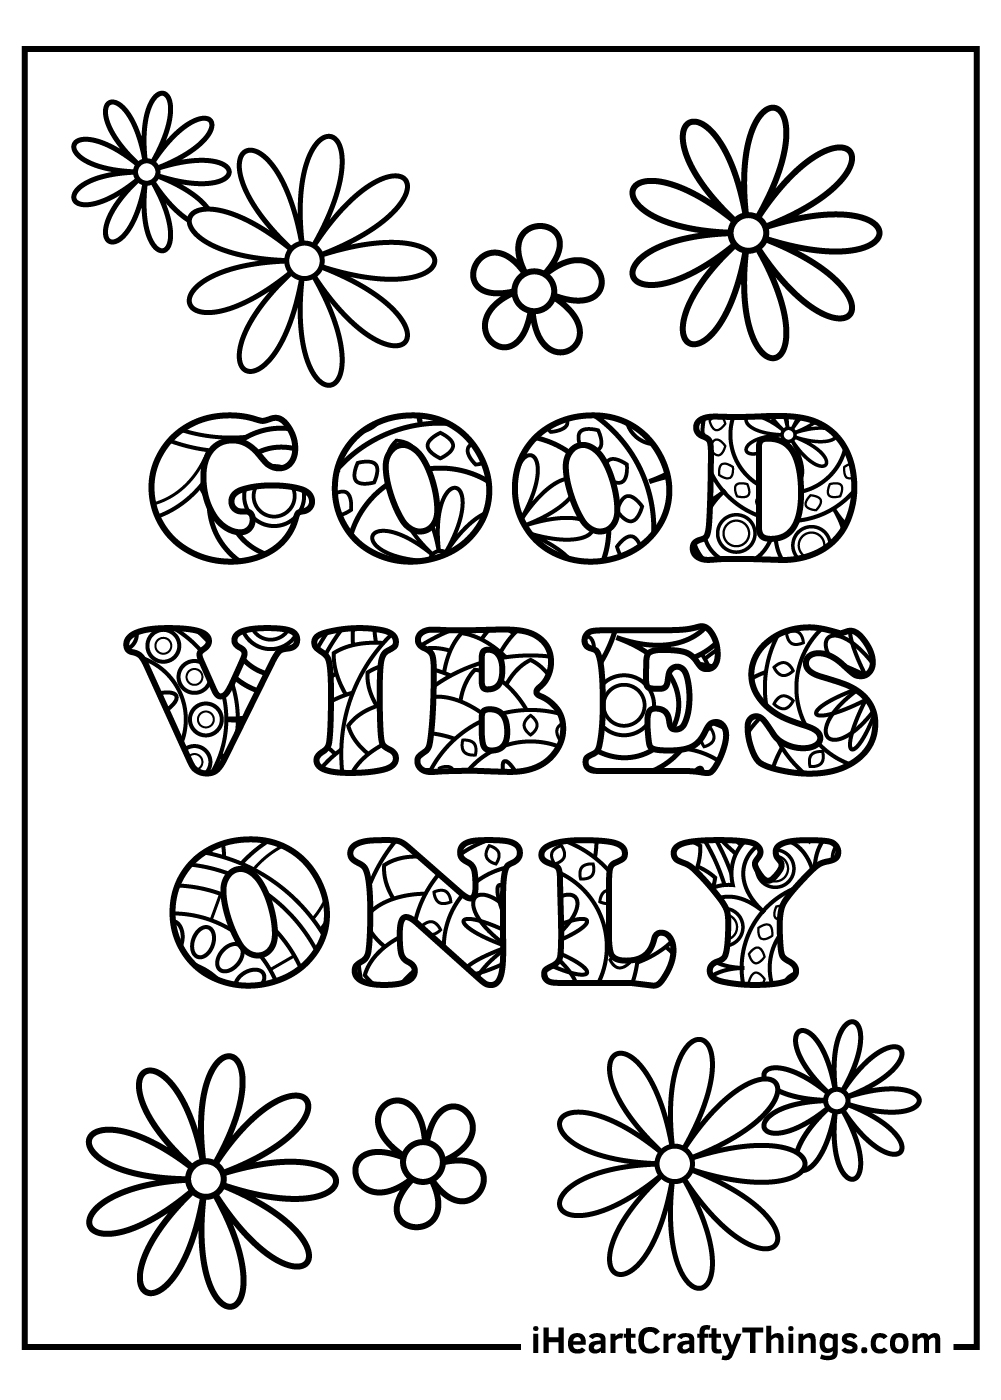 Stress relief coloring pages free printables